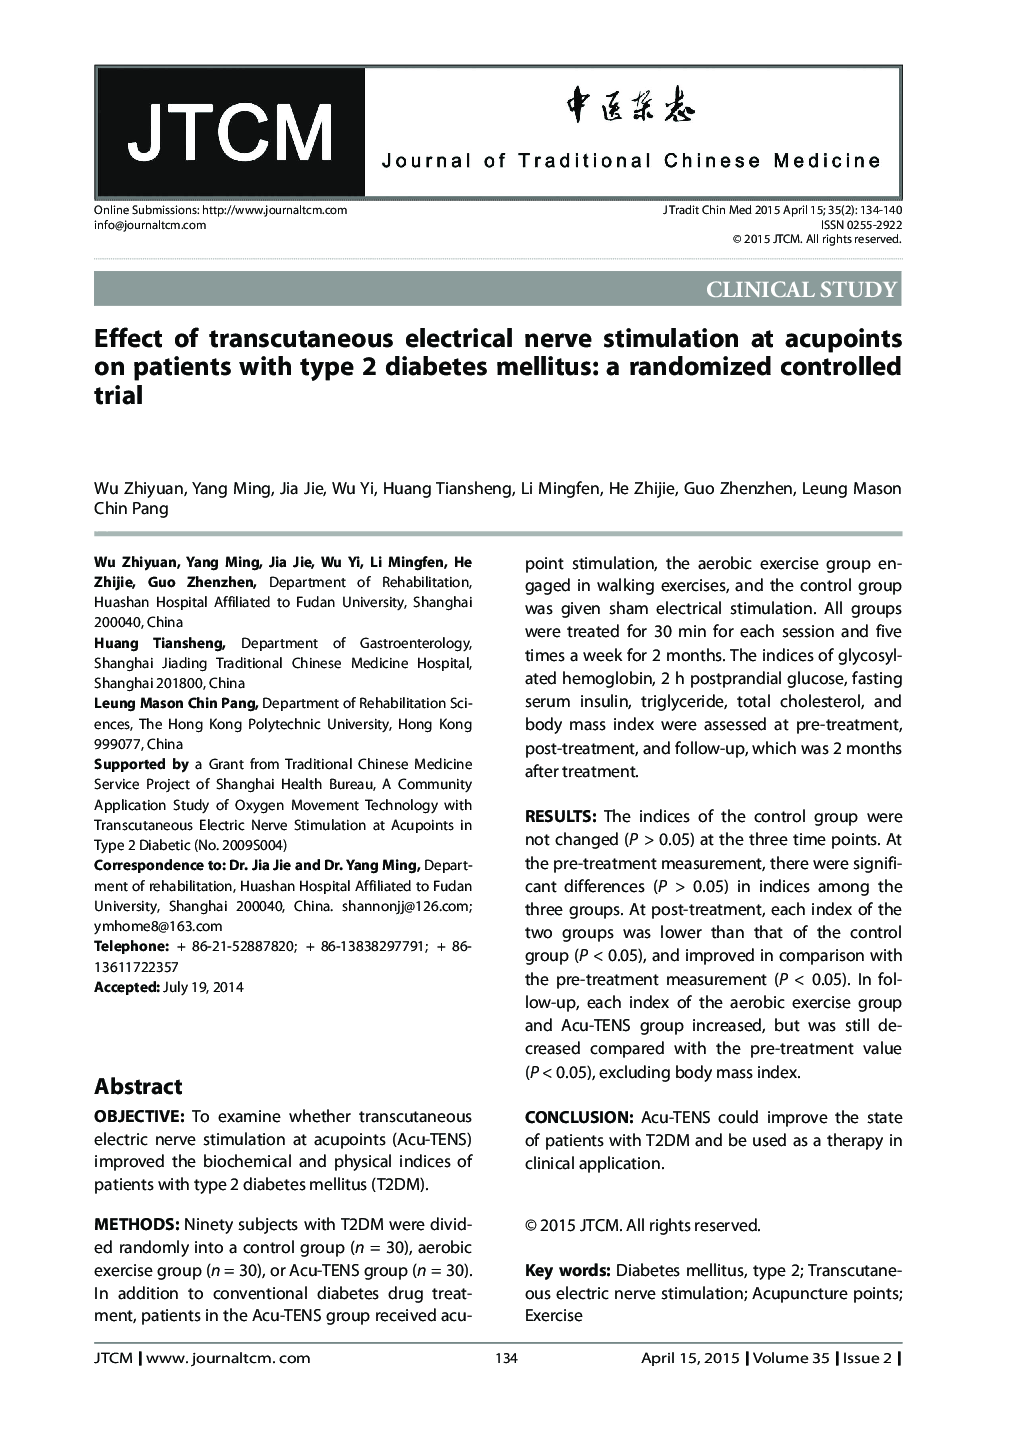 Effect of transcutaneous electrical nerve stimulation at acupoints on patients with type 2 diabetes mellitus: a randomized controlled trial 